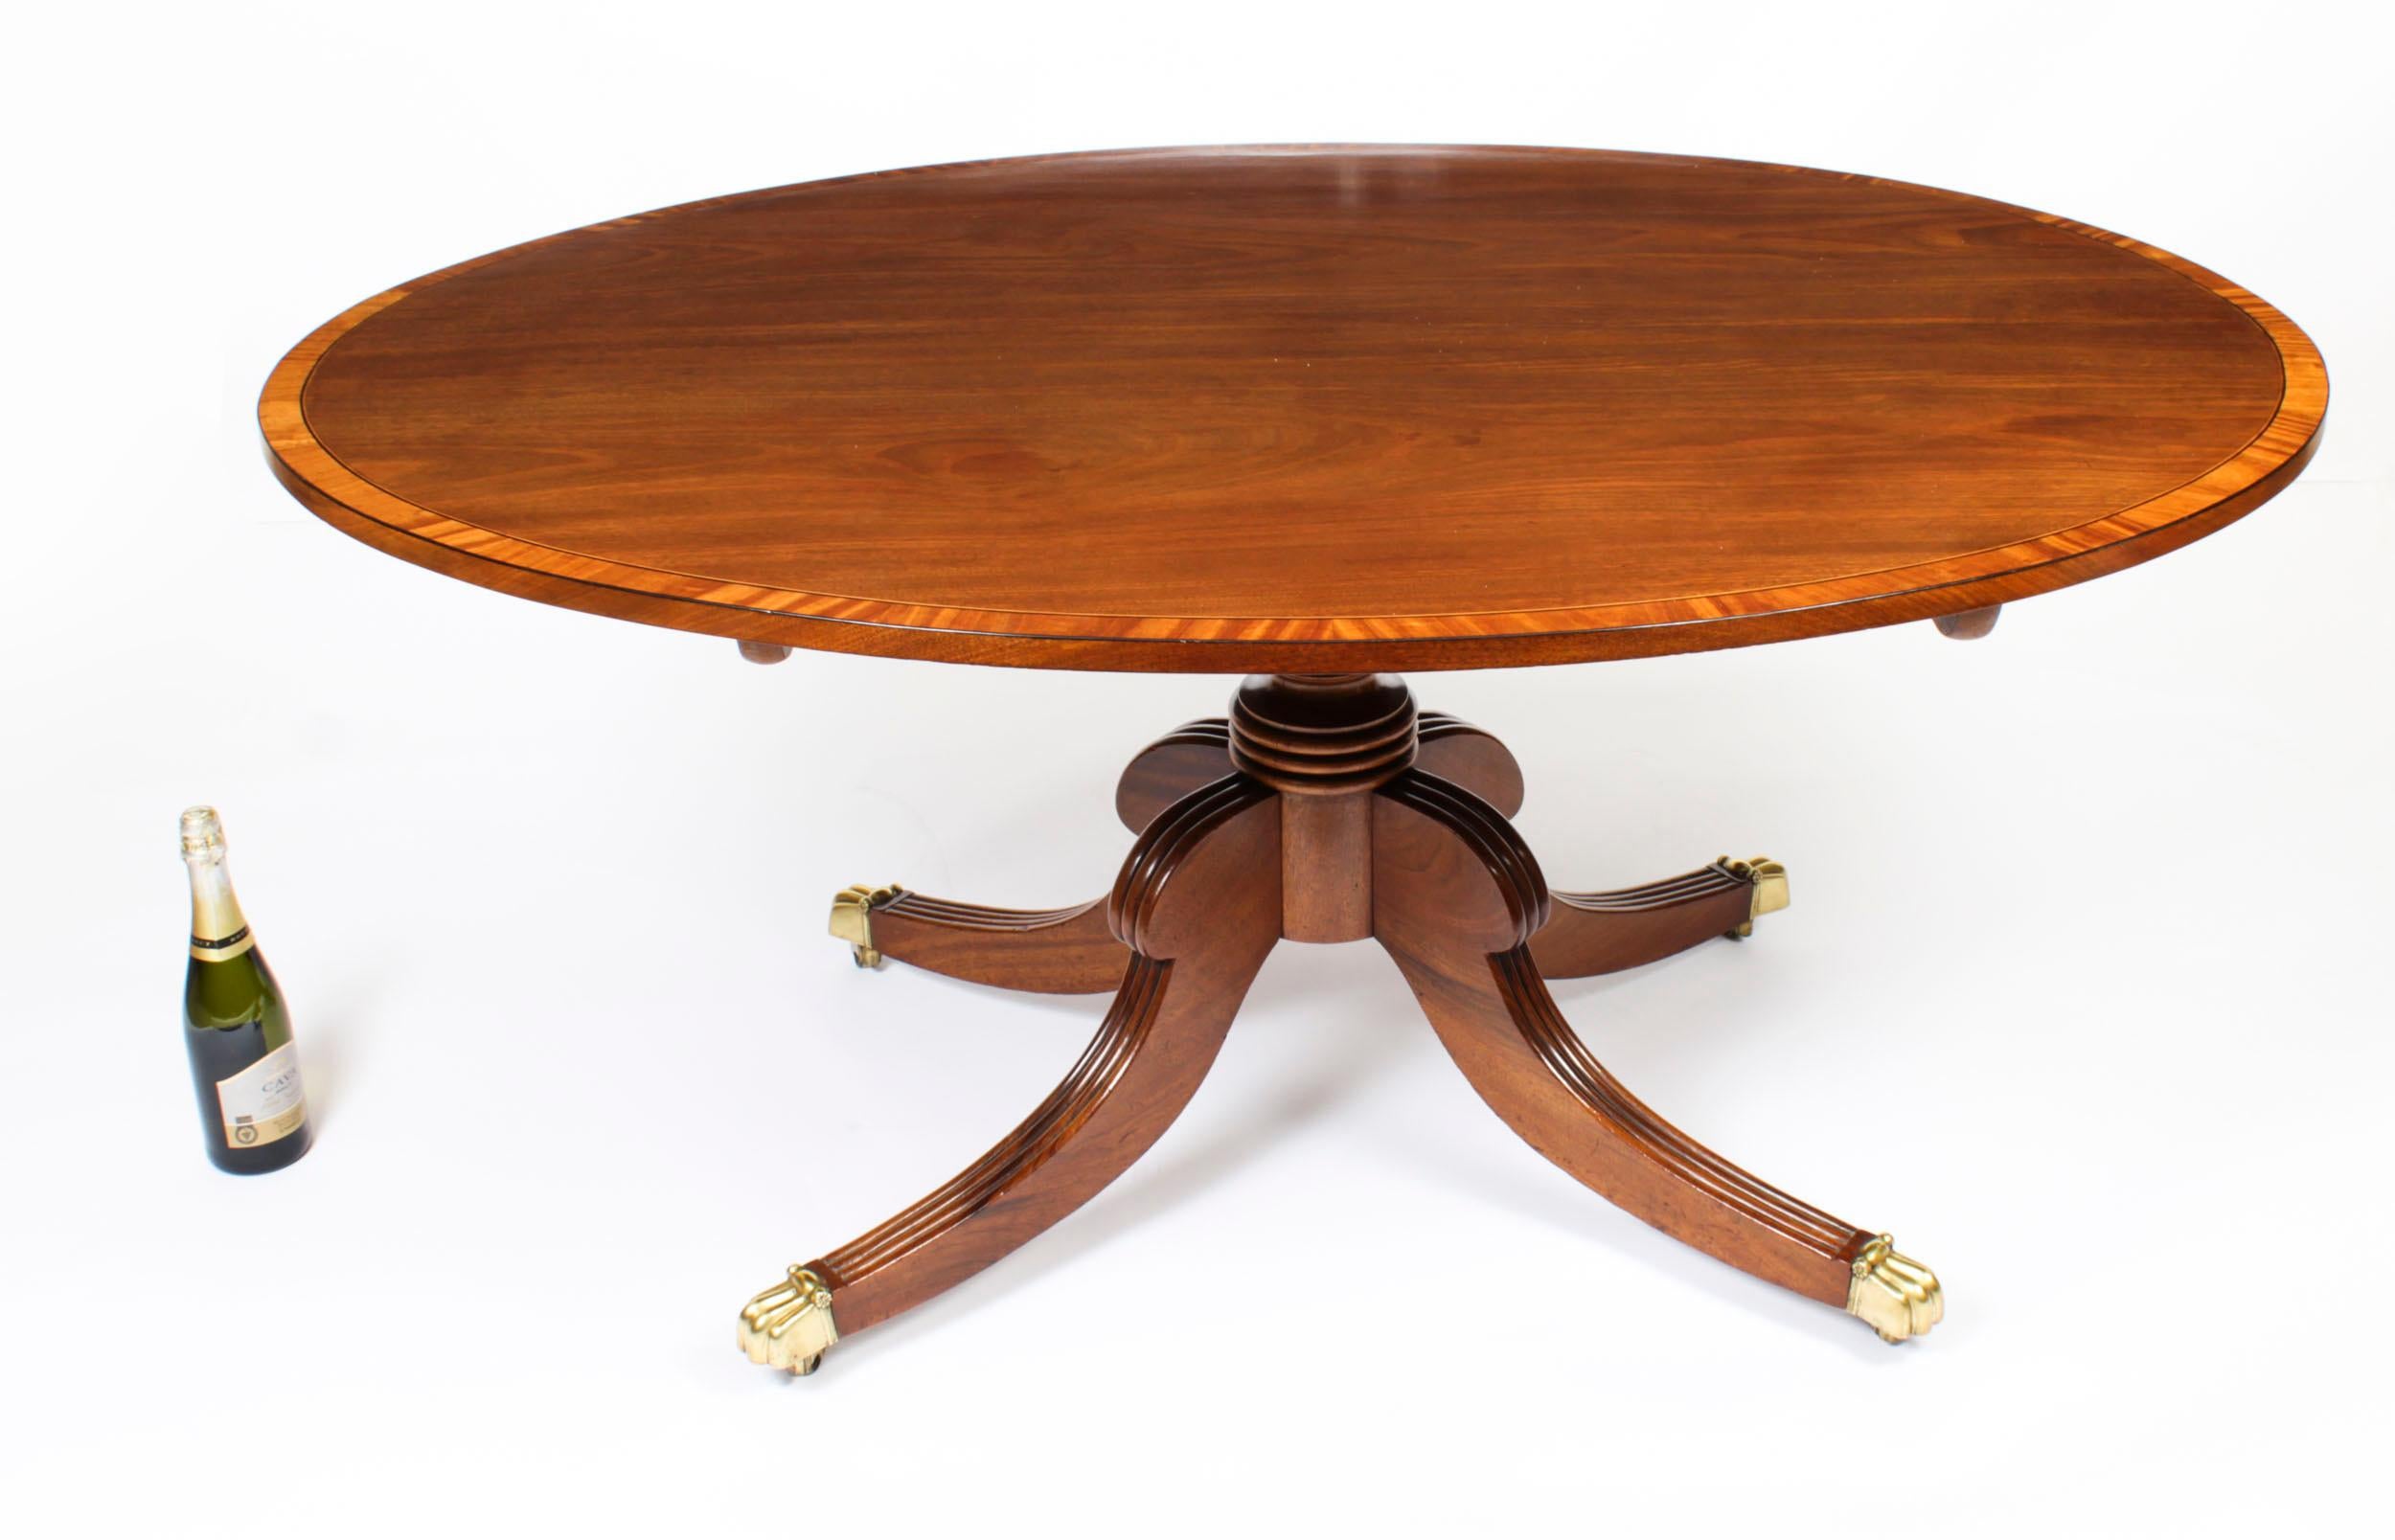 Antique Oval Regency Flame Mahogany Dining Table 19th C For Sale 10